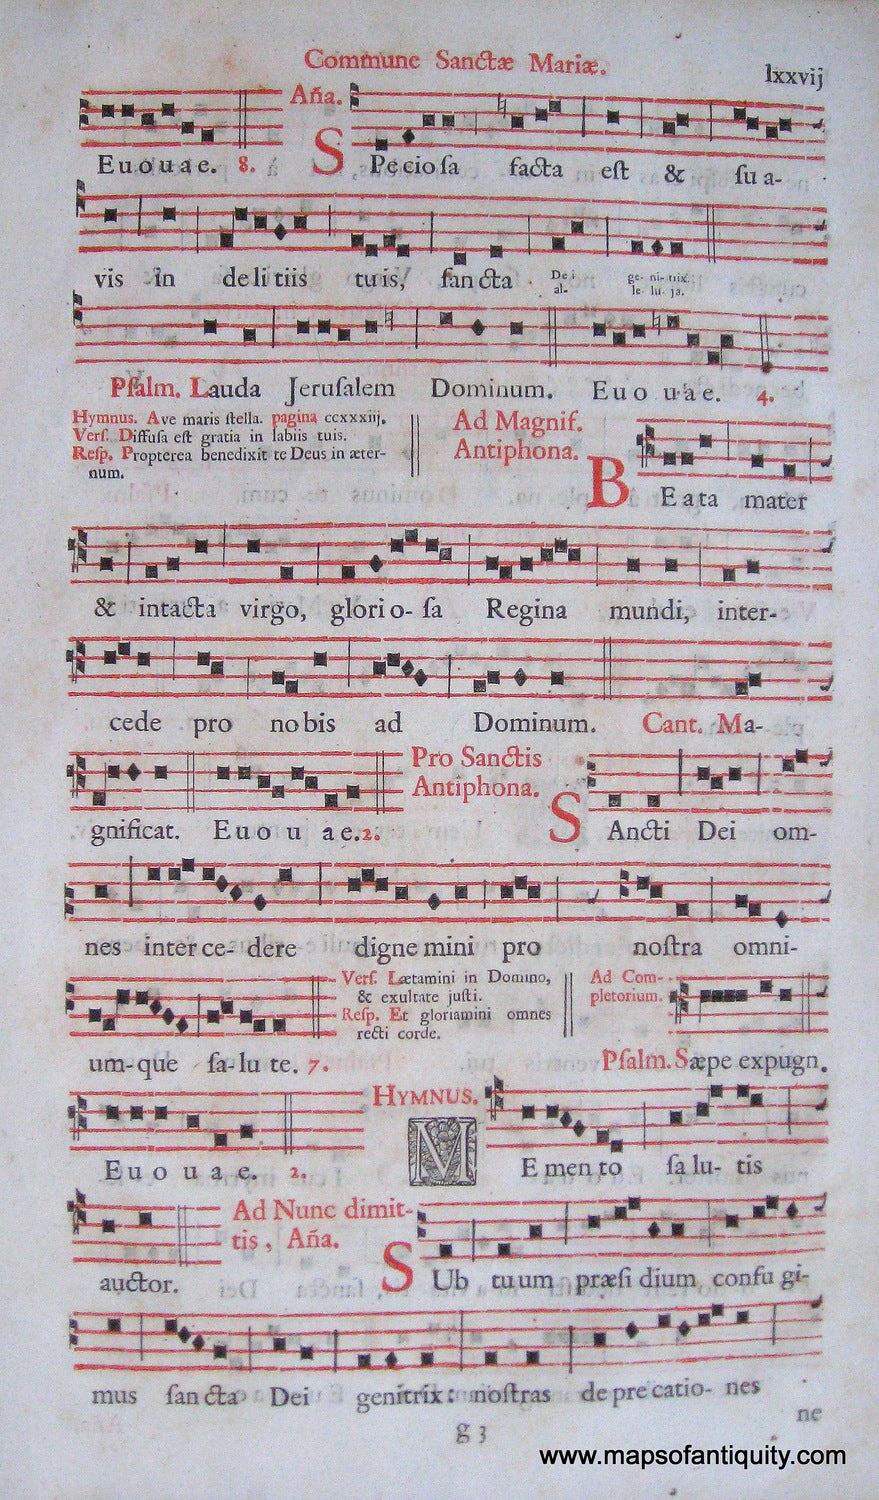 Printed-Black-and-Red-Antique-Sheet-Music-Antique-Sheet-Music-Commune-Sanctae-Maria-pg.-lxxvij-lxxviij-**********-Antique-Prints-Antique-Sheet-Music-c.-17th-century-Unknown-Maps-Of-Antiquity